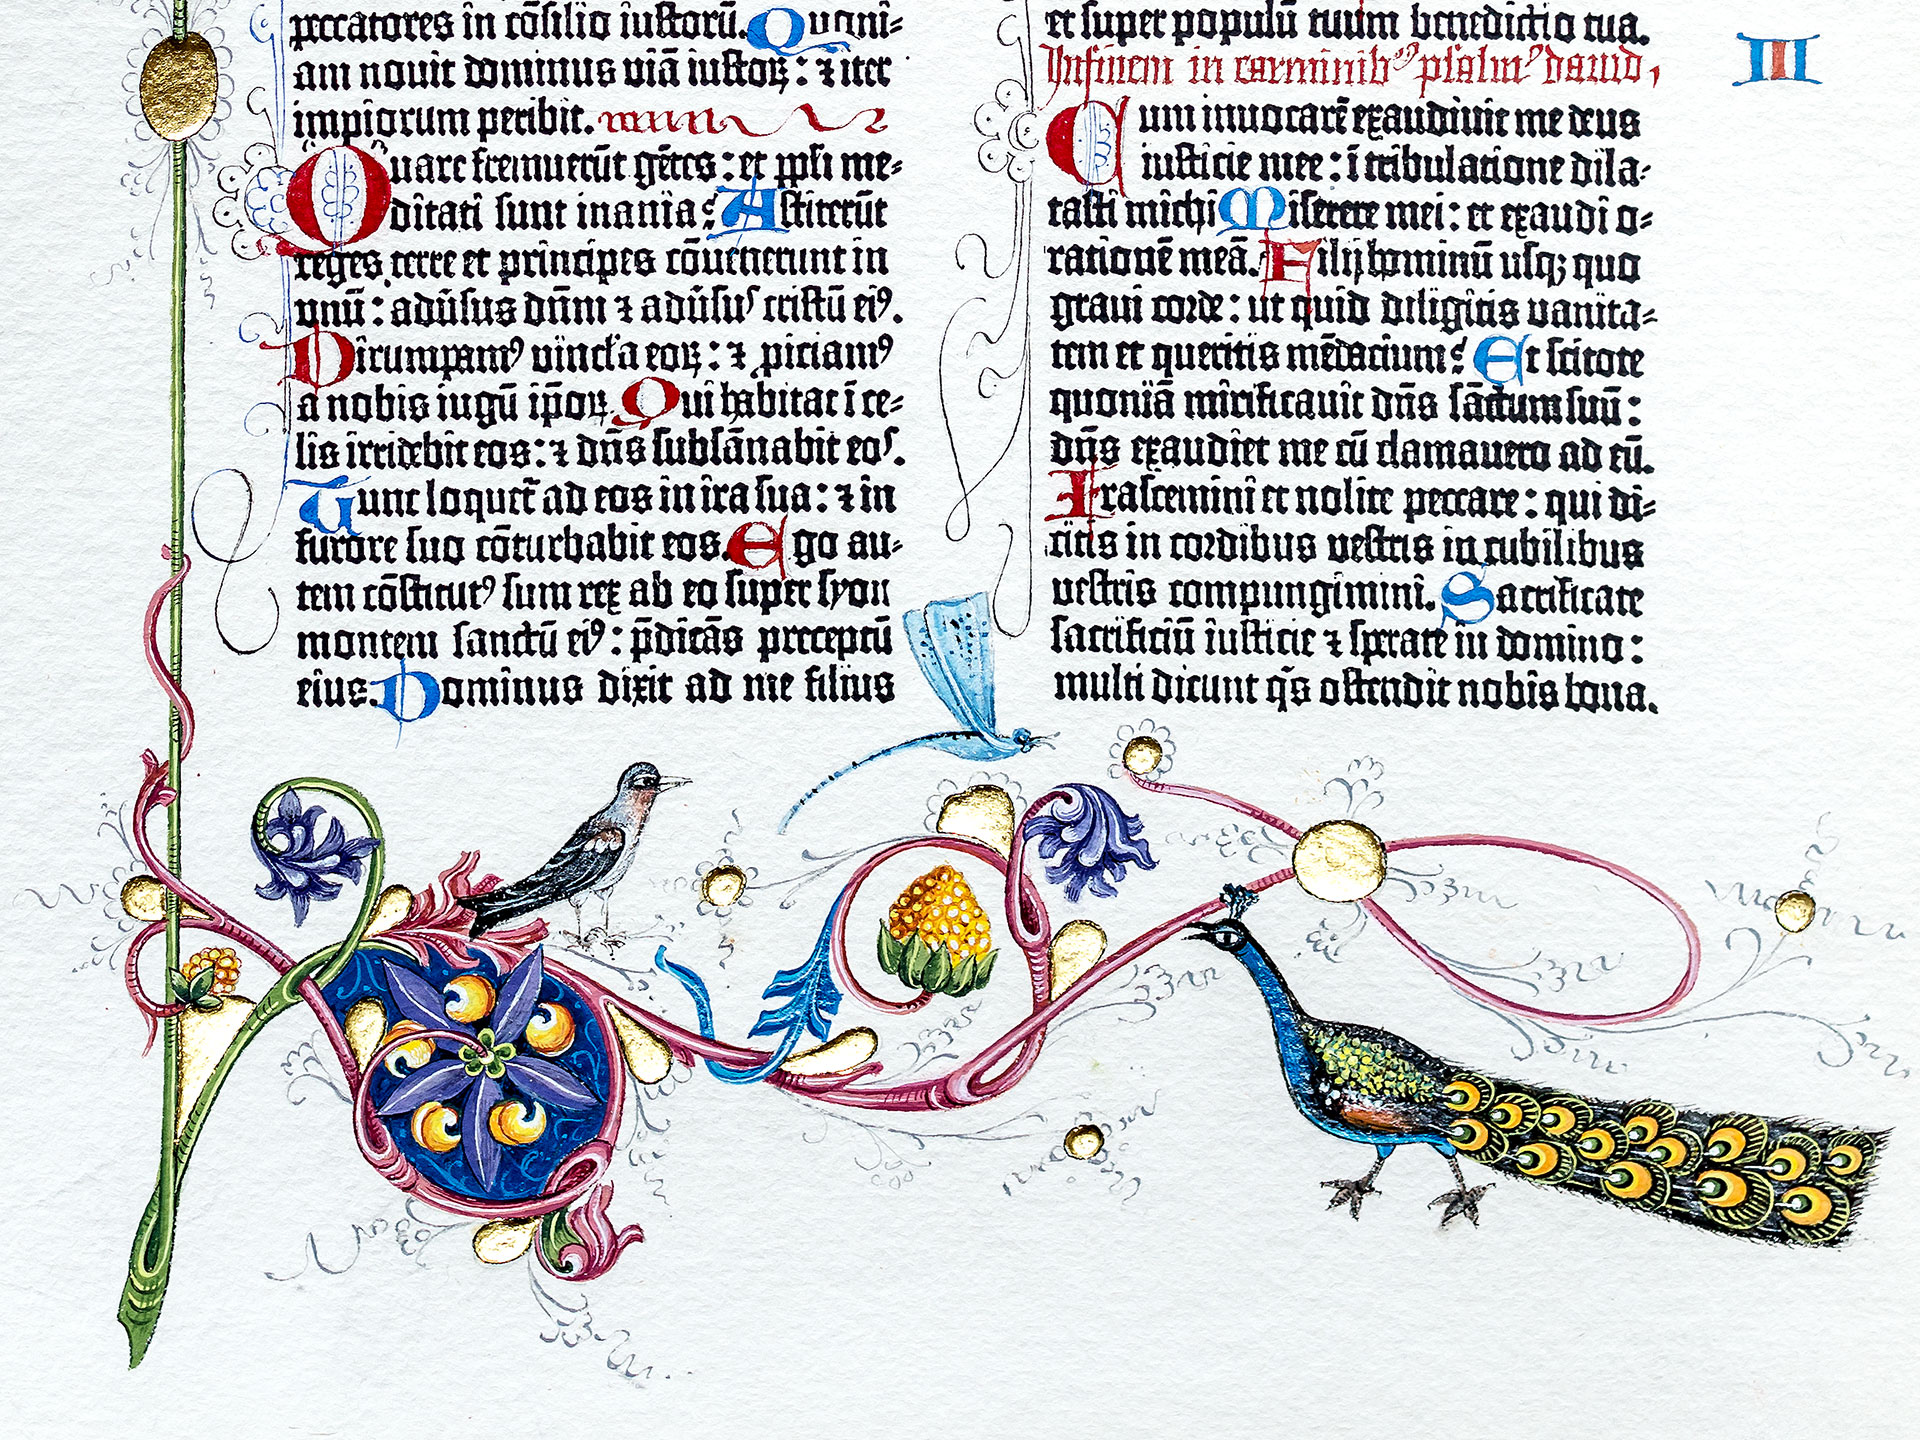 Psalm 1. Ornamental page from the Berlin copy of the Gutenberg Bible